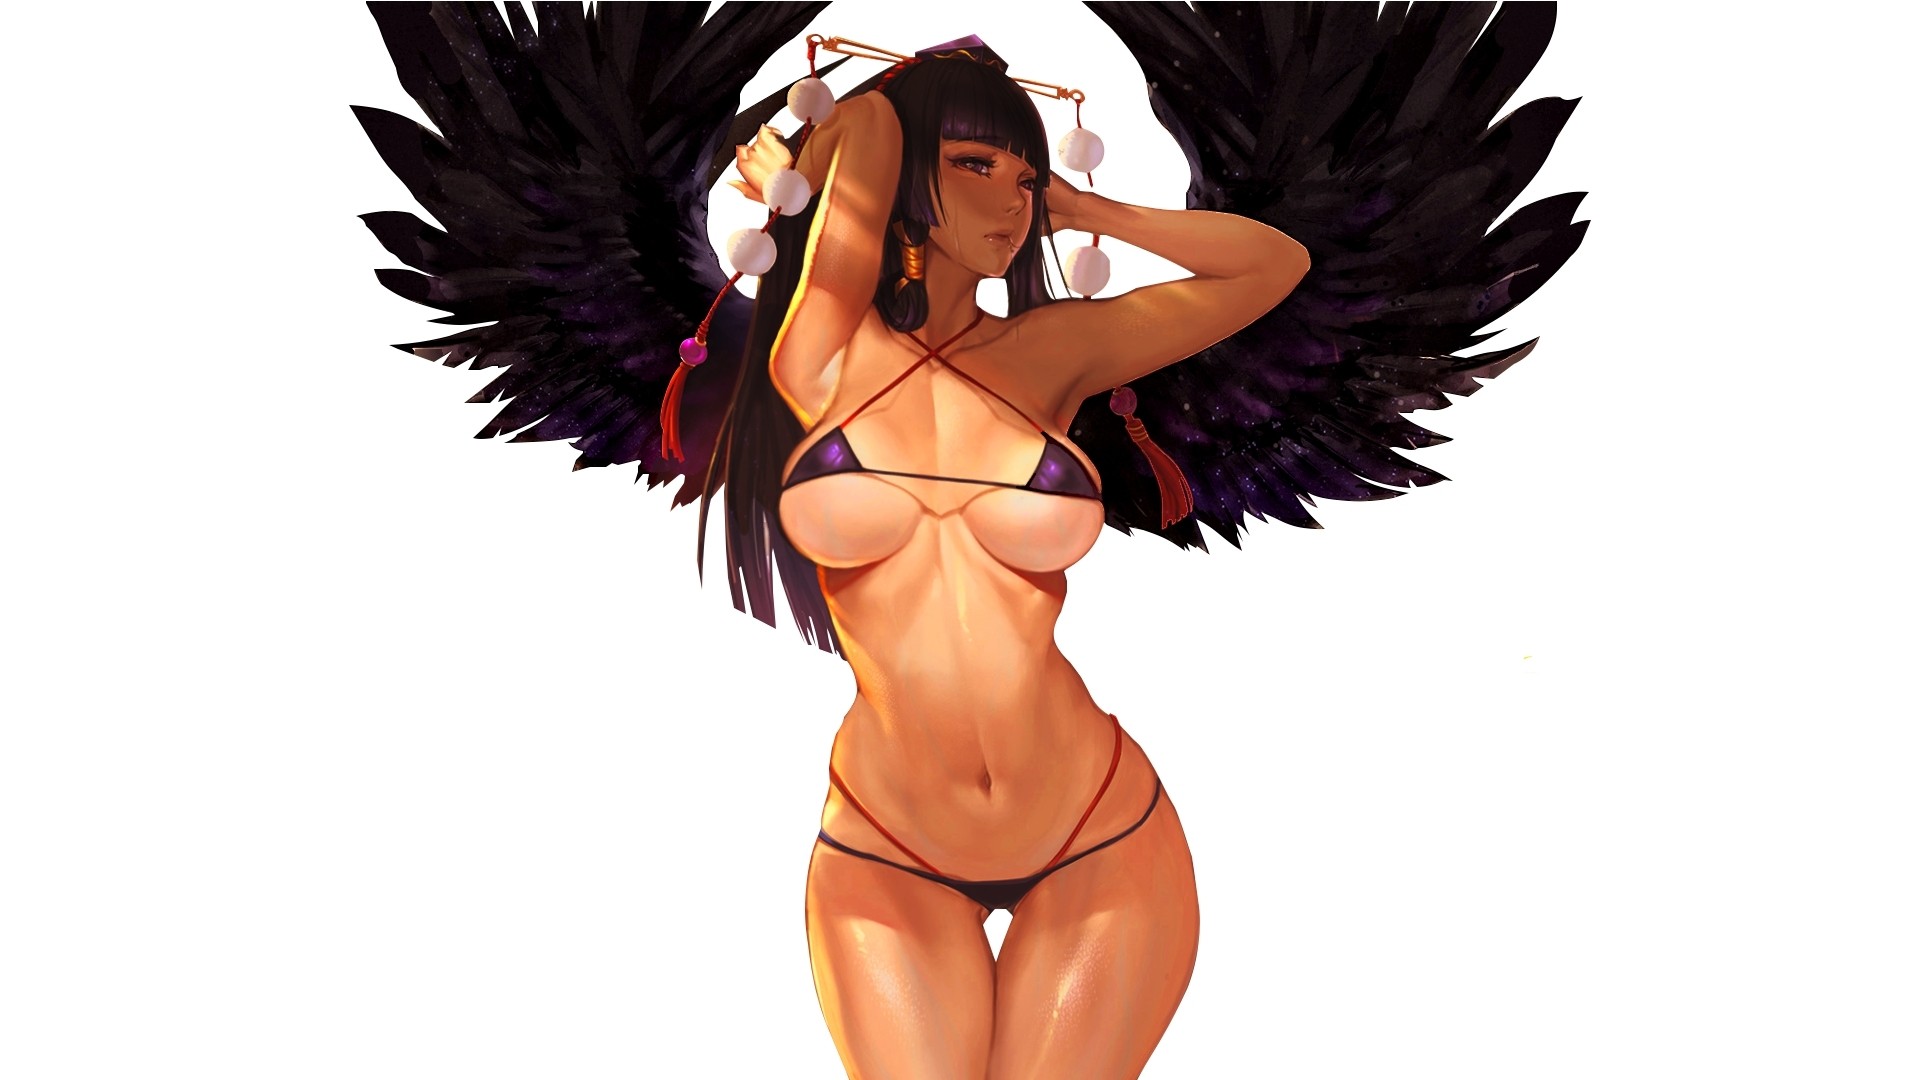 Anime 1920x1080 wings anime girls big boobs micro bikini boobs arms up Dead or Alive 5 anime video games video game girls video game warriors video game characters belly simple background white background looking away dark hair women Nyotengu (Dead or Alive) curvy